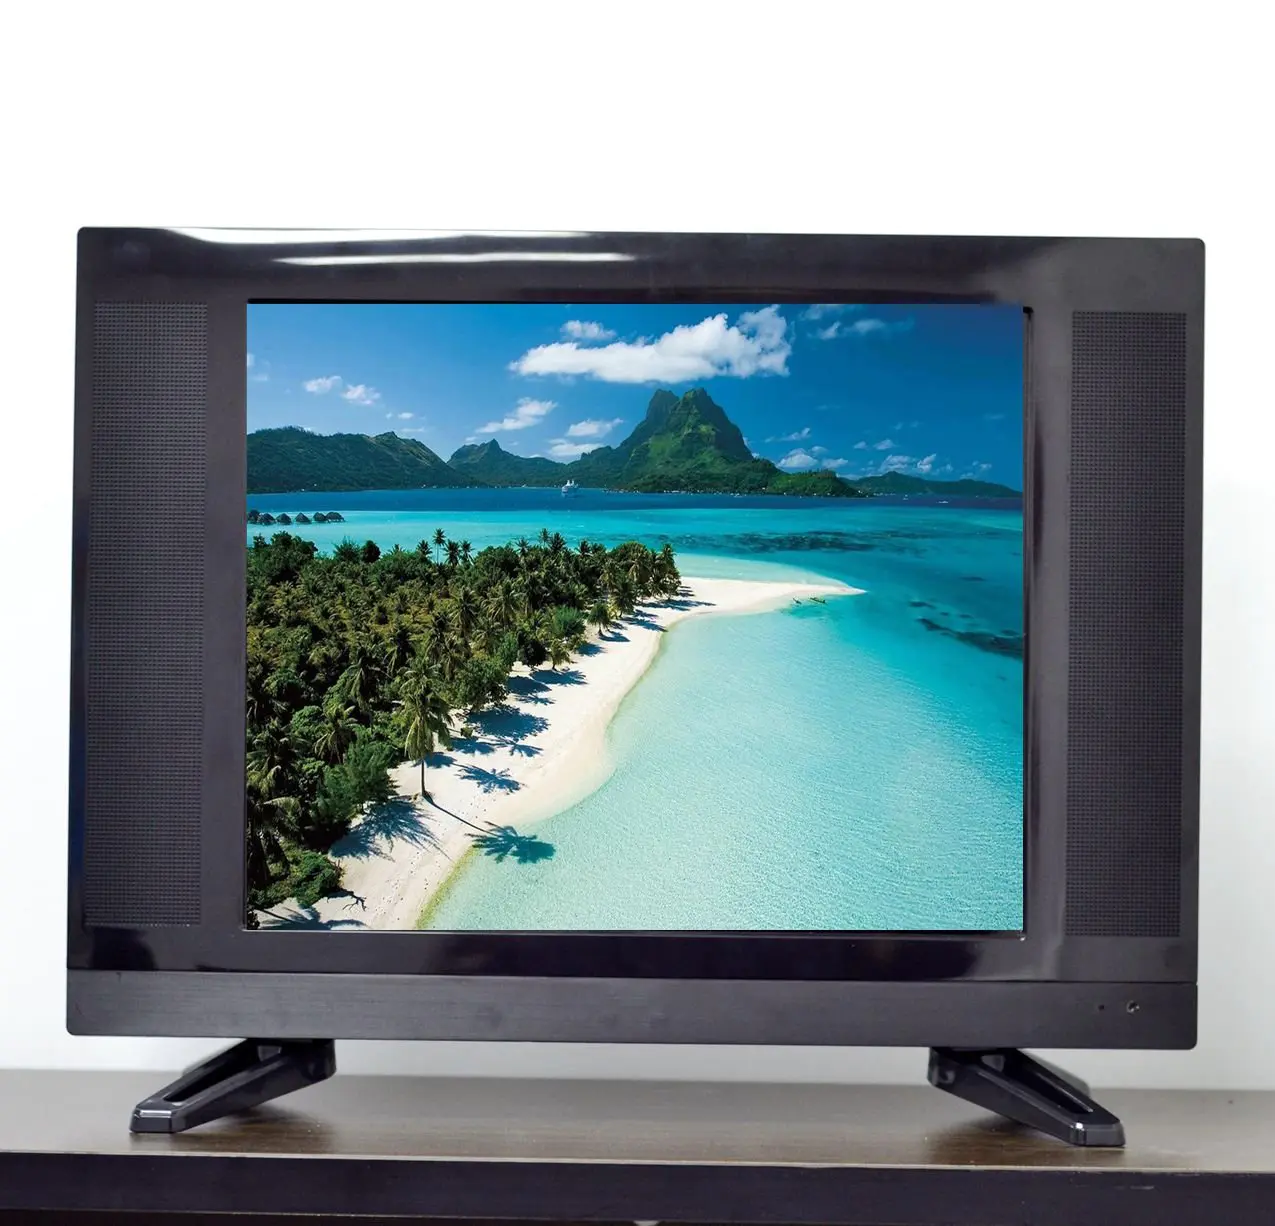 15 inch universal china led lcd tv in ethiopia